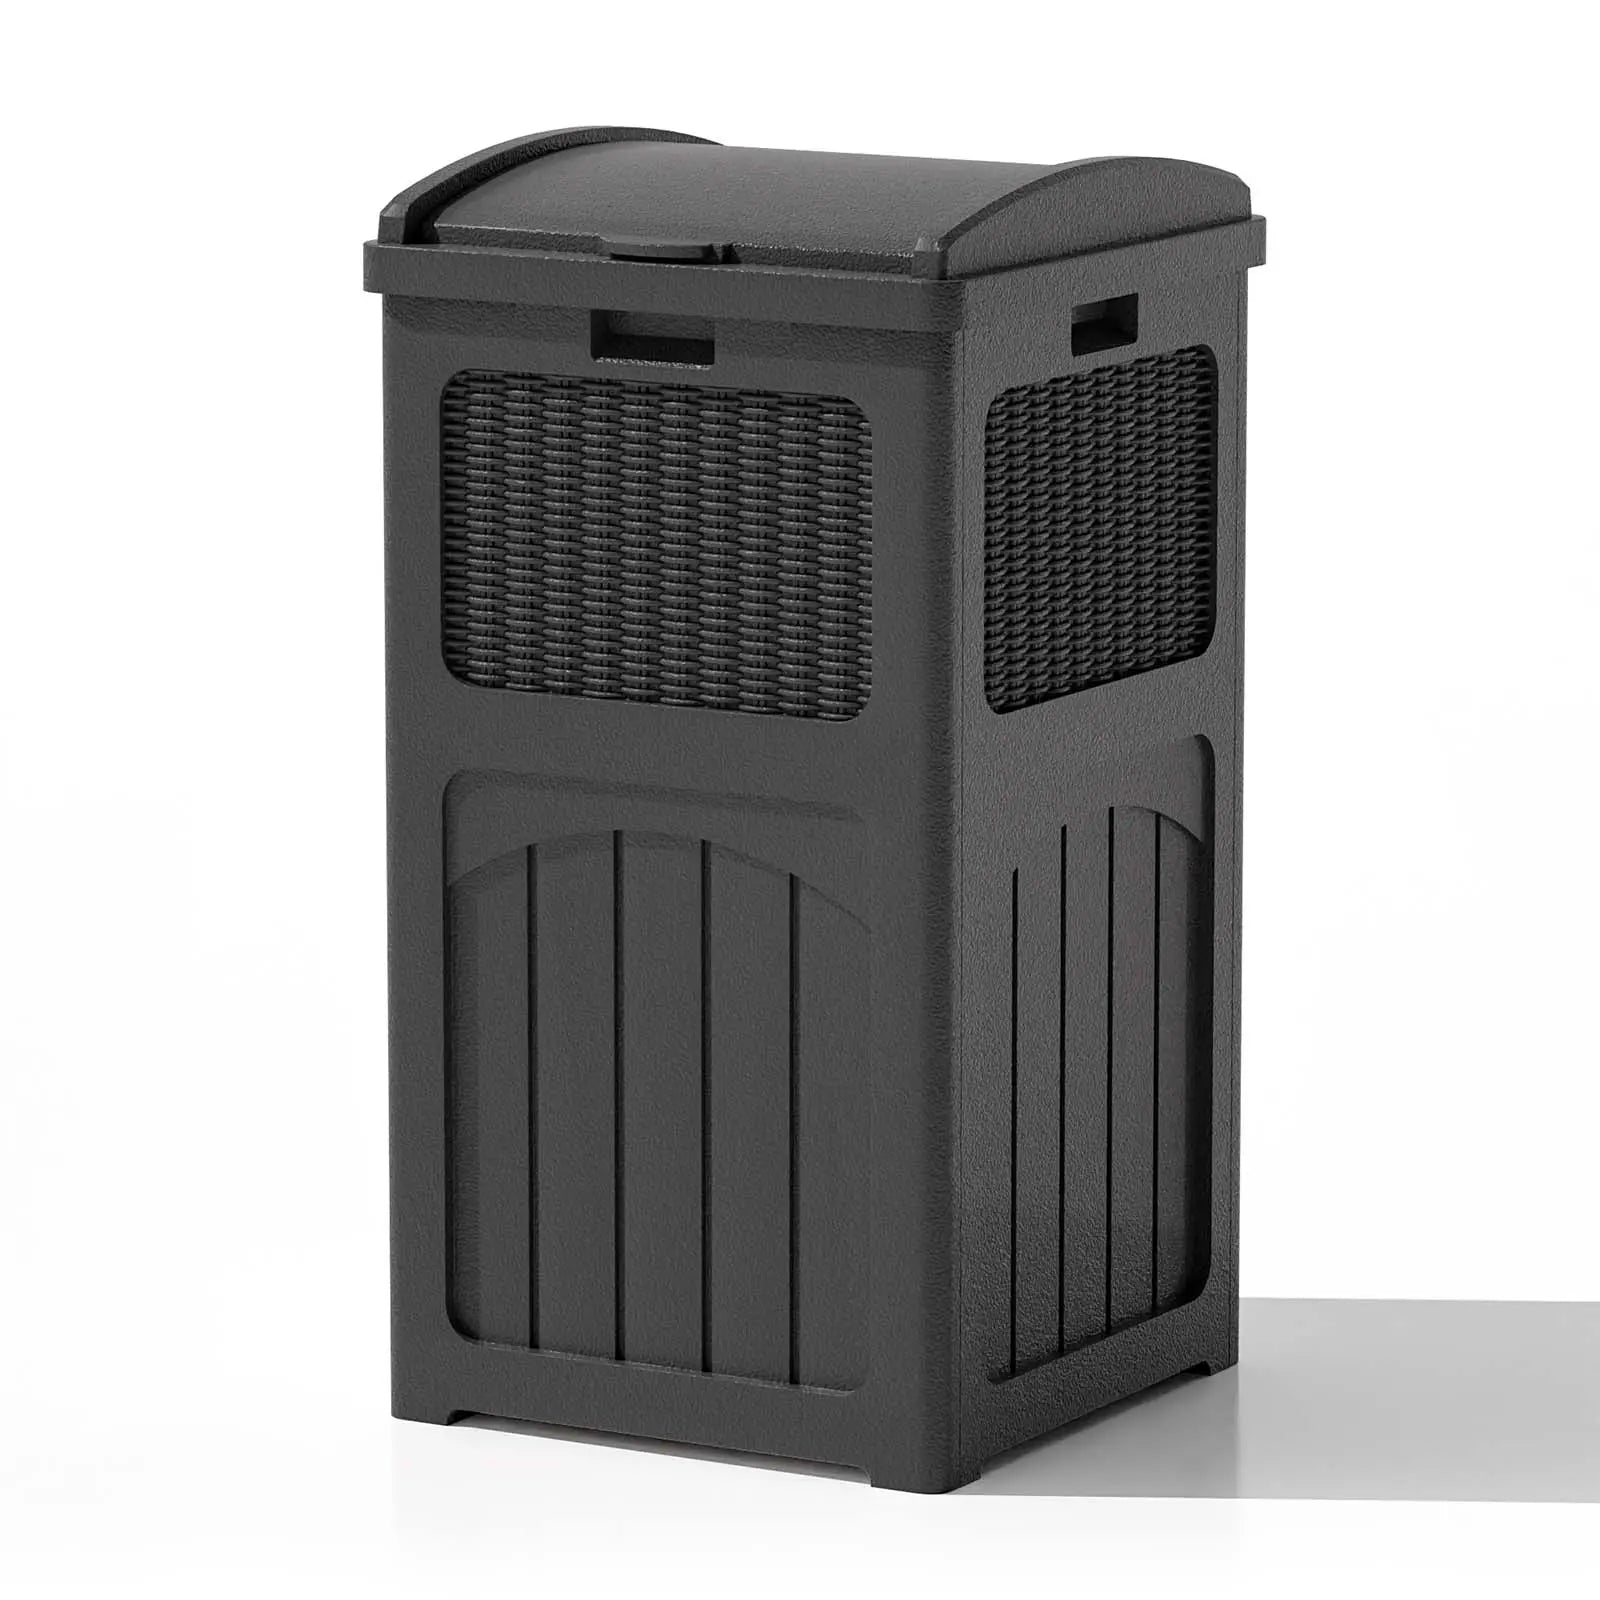 Patiowell 36 Gallon Resin Trash Can-Ink Black